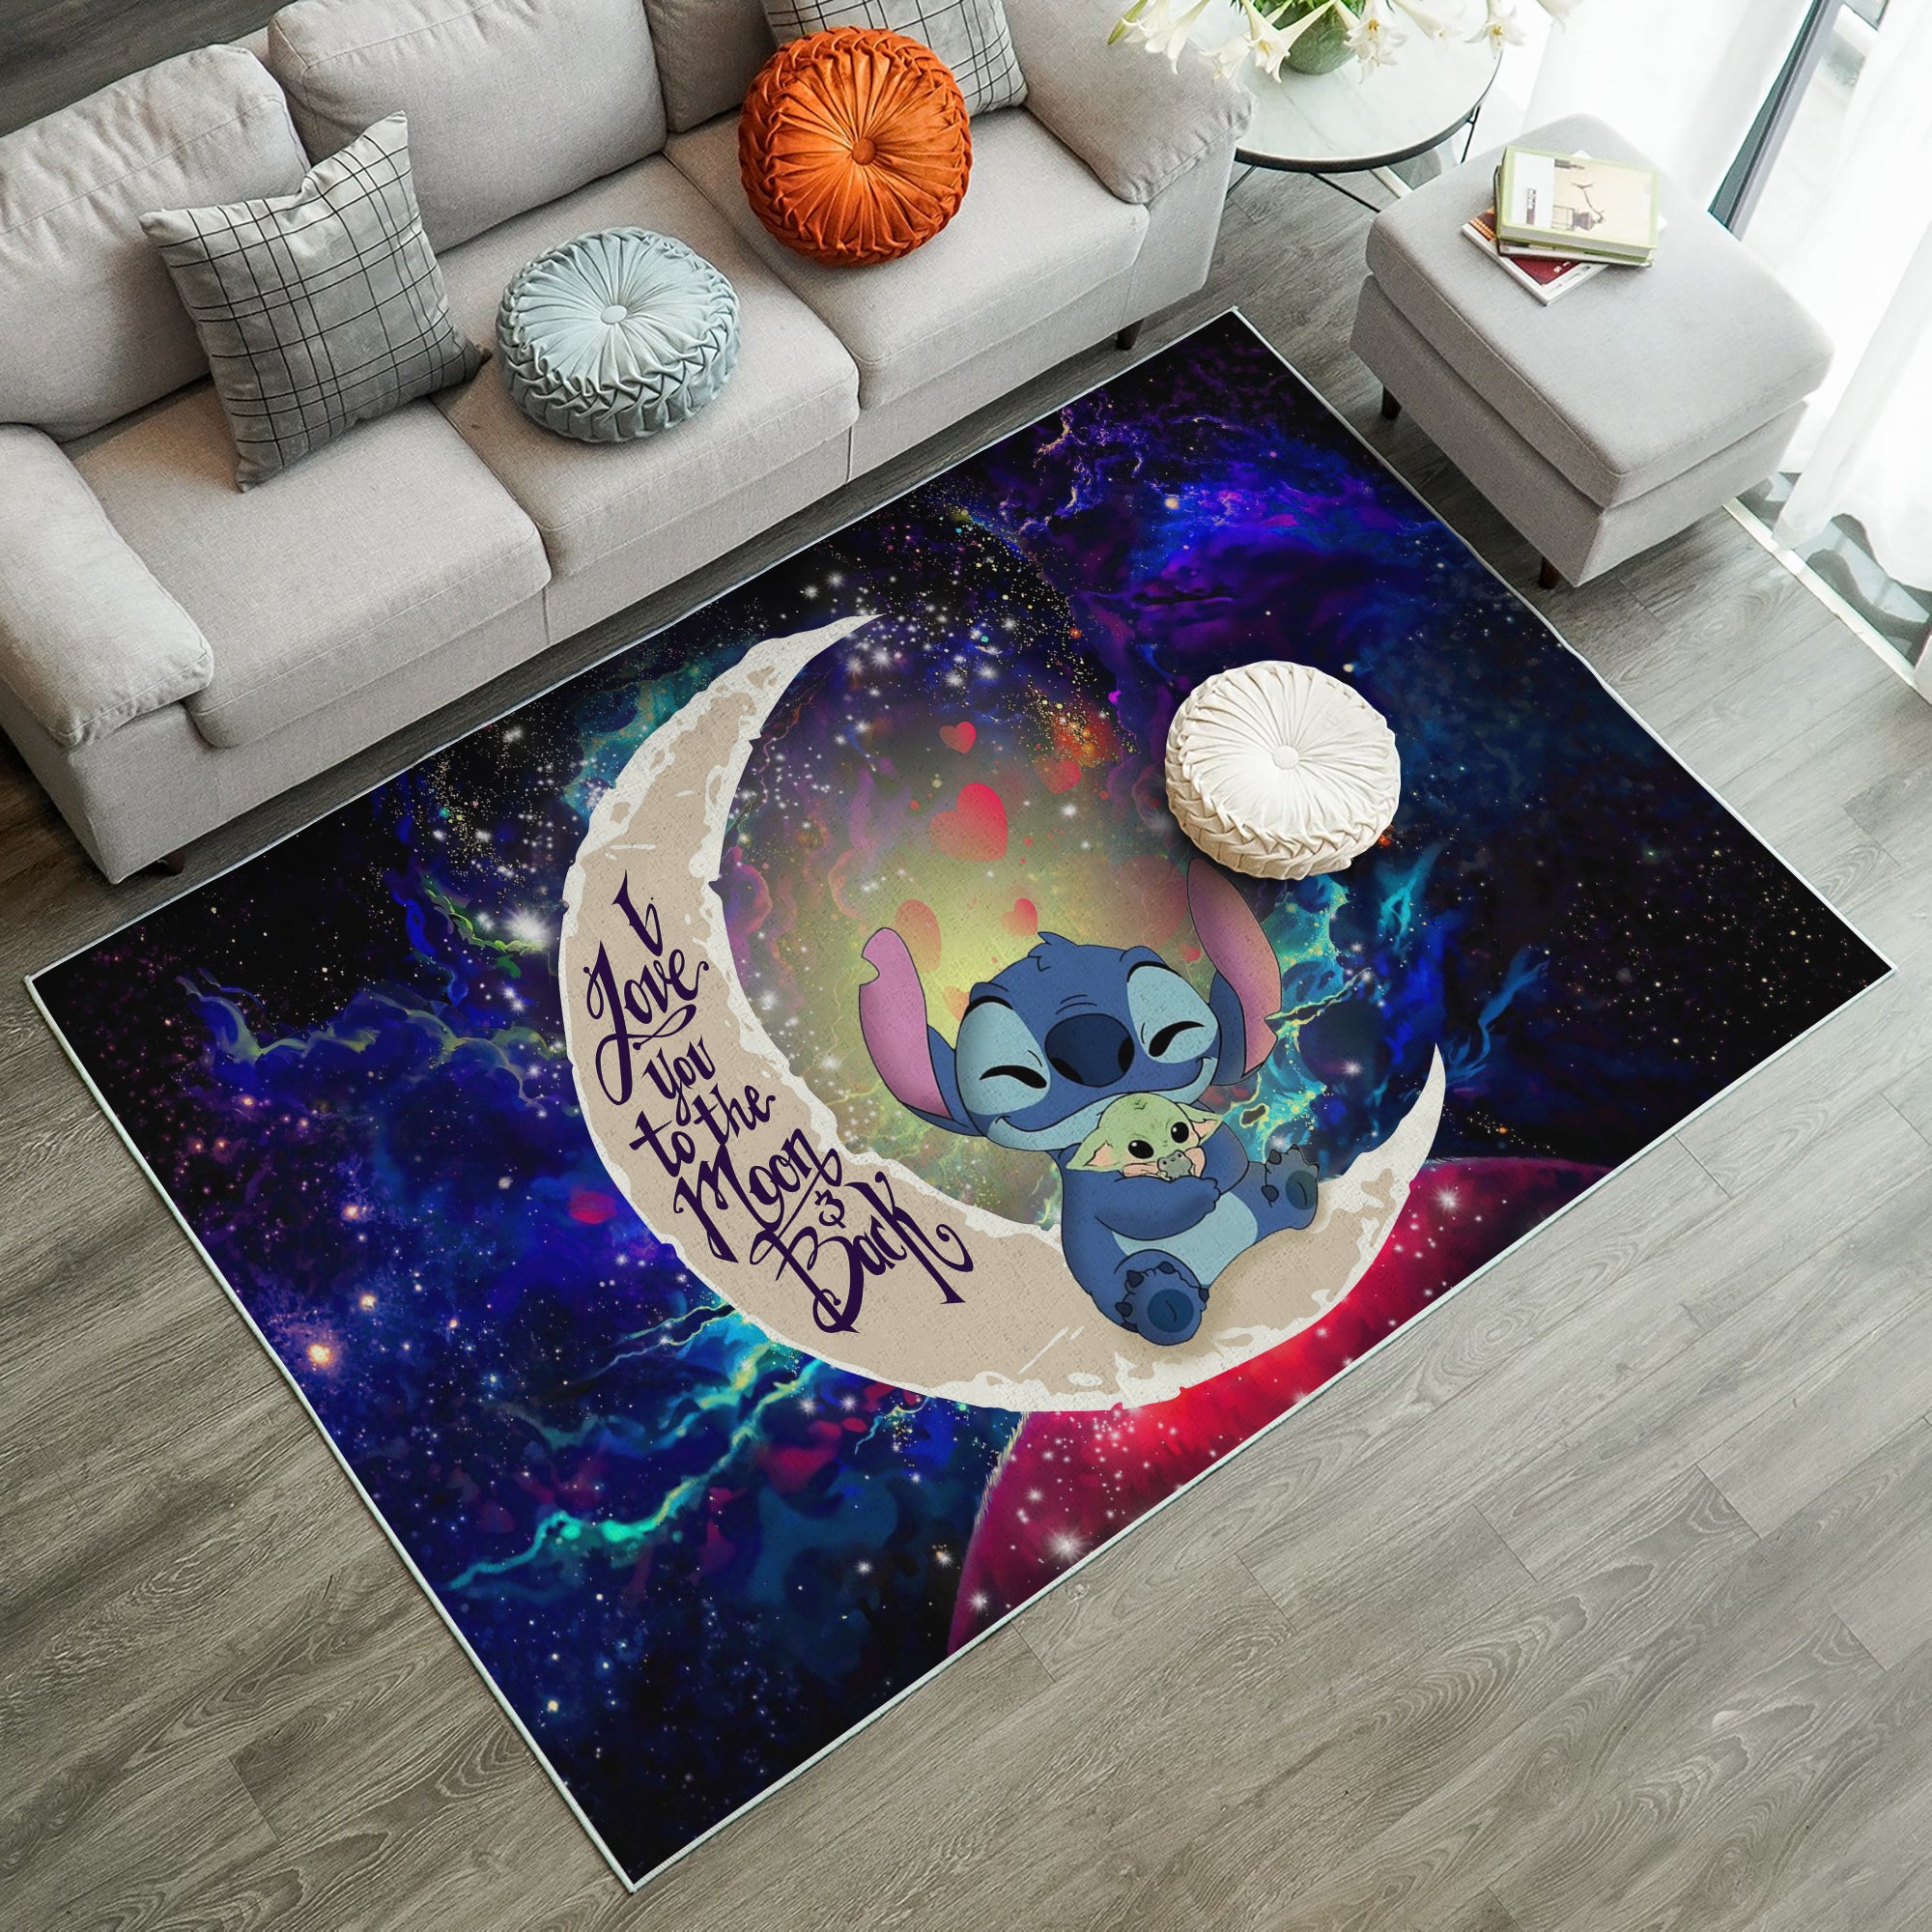 Stitch Hold Baby Yoda Love You To The Moon Galaxy Carpet Rug Home Room Decor